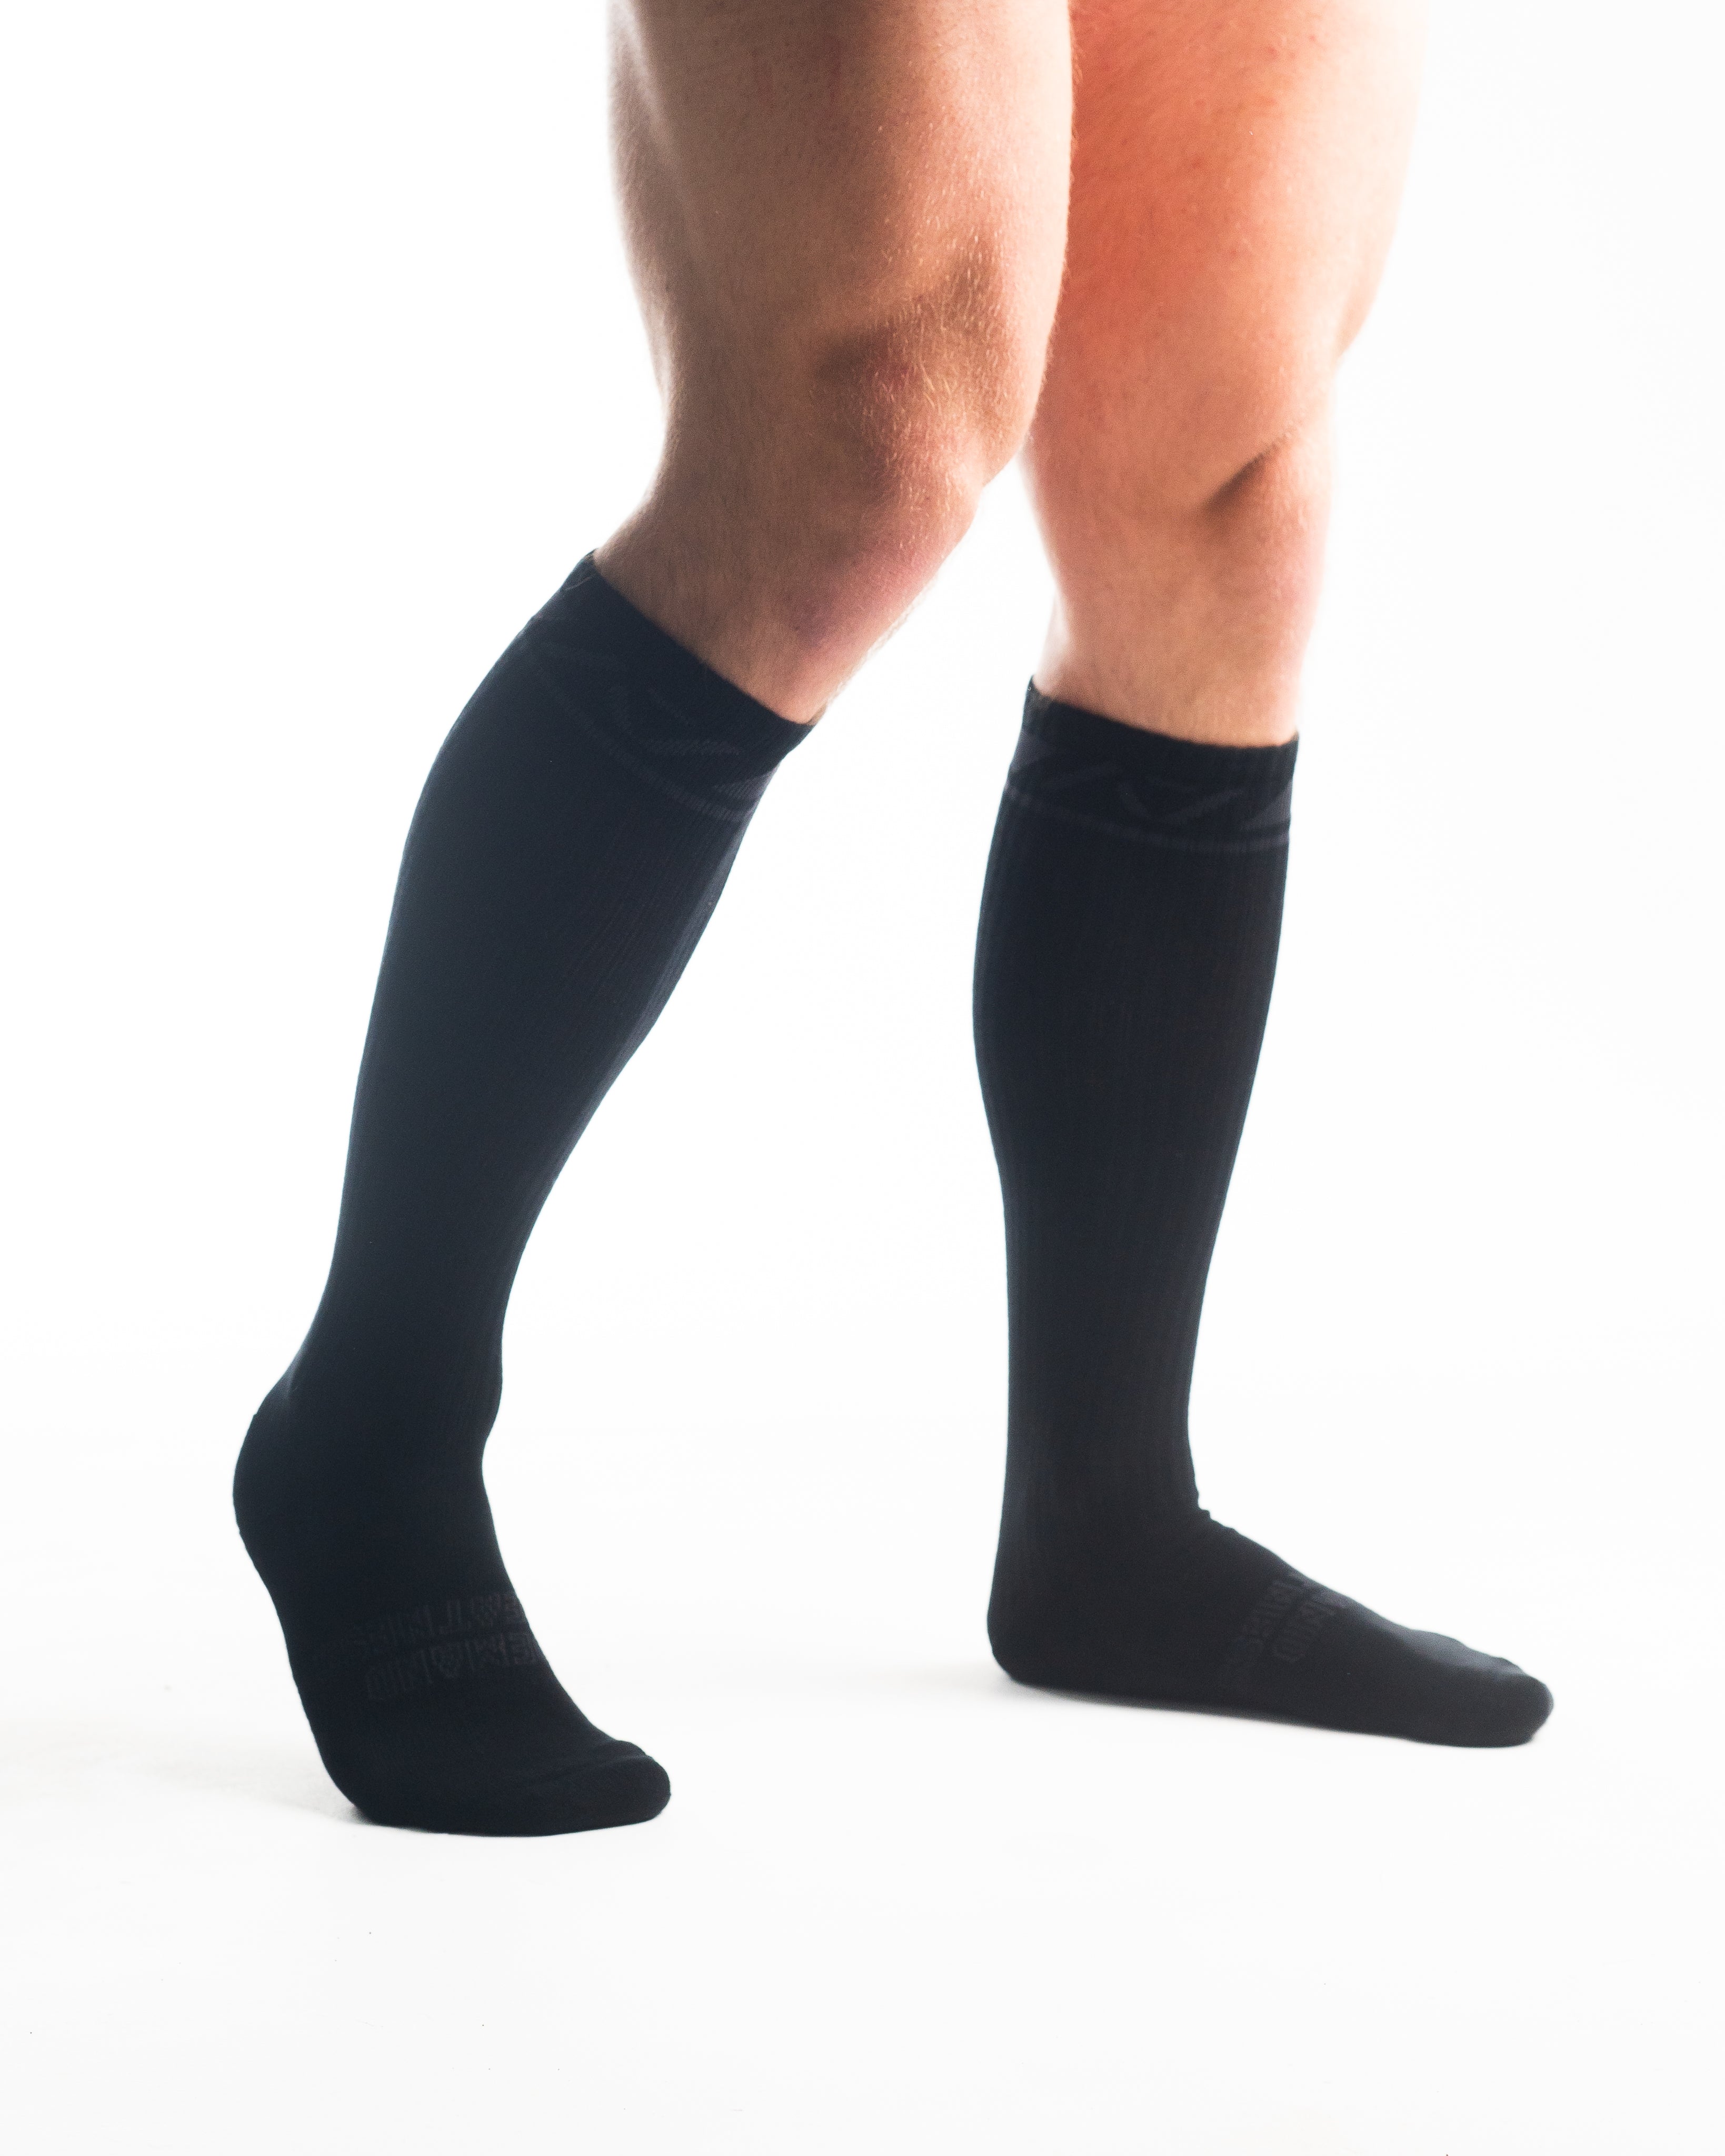 A7 Stealth Deadlift socks are designed specifically for pulls and keep your shins protected from scrapes. A7 deadlift socks are a perfect pair to wear in training or powerlifting competition. The IPF Approved Kit includes Powerlifting Singlet, A7 Meet Shirt, A7 Zebra Wrist Wraps, A7 Deadlift Socks, Hourglass Knee Sleeves (Stiff Knee Sleeves and Rigor Mortis Knee Sleeves). All A7 Powerlifting Equipment shipping to UK, Norway, Switzerland and Iceland.